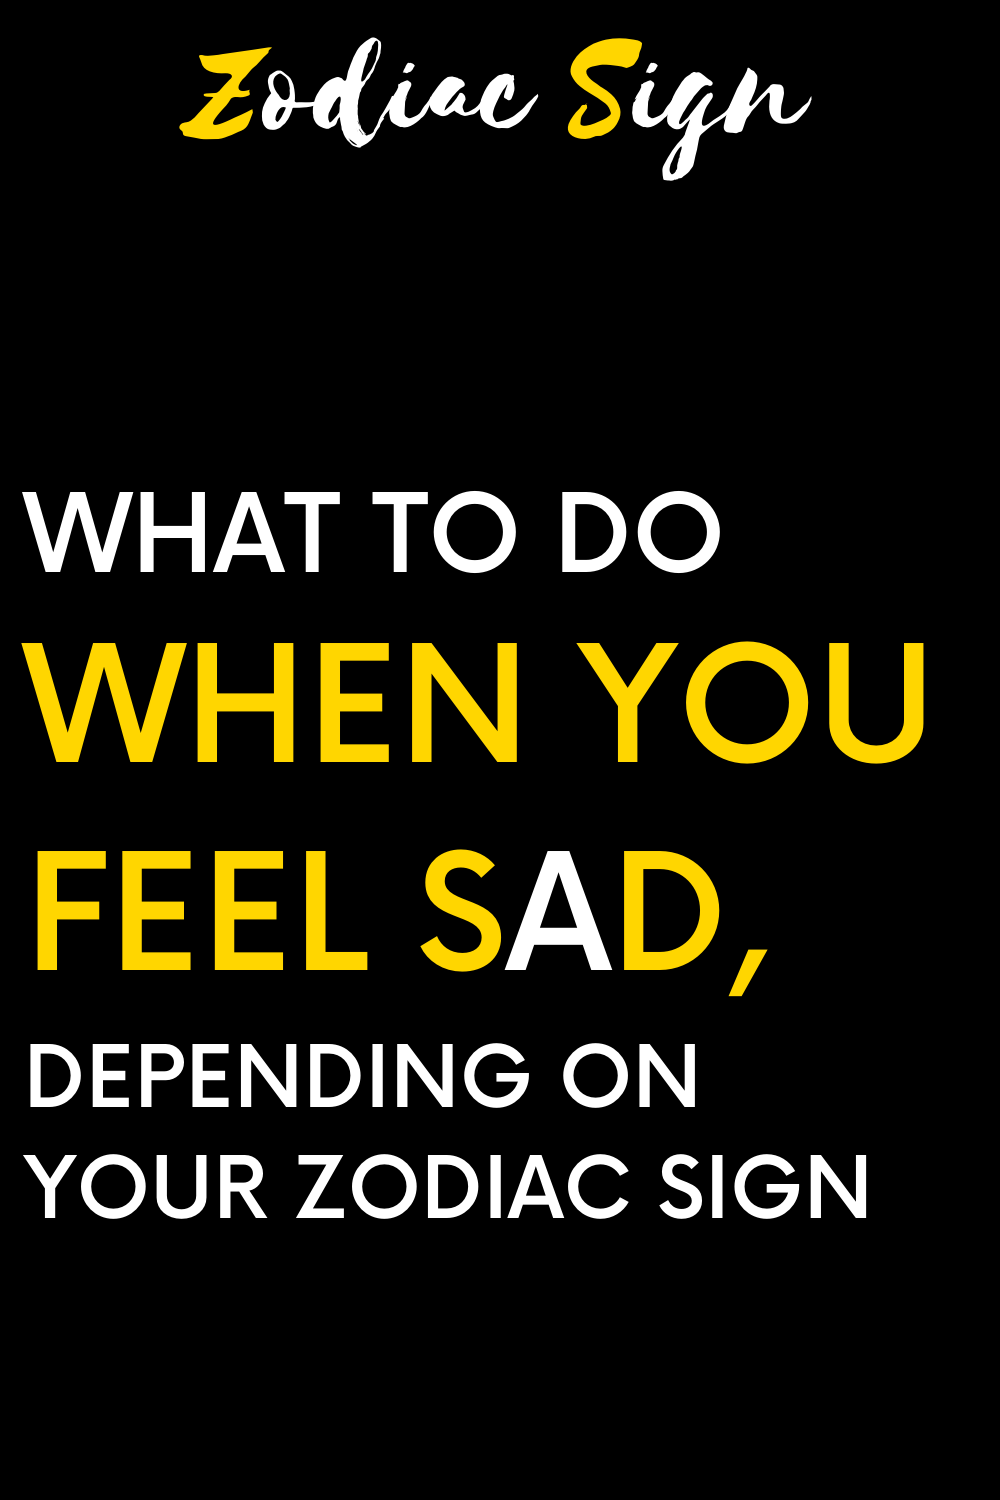 What to do when you feel sad, depending on your zodiac sign